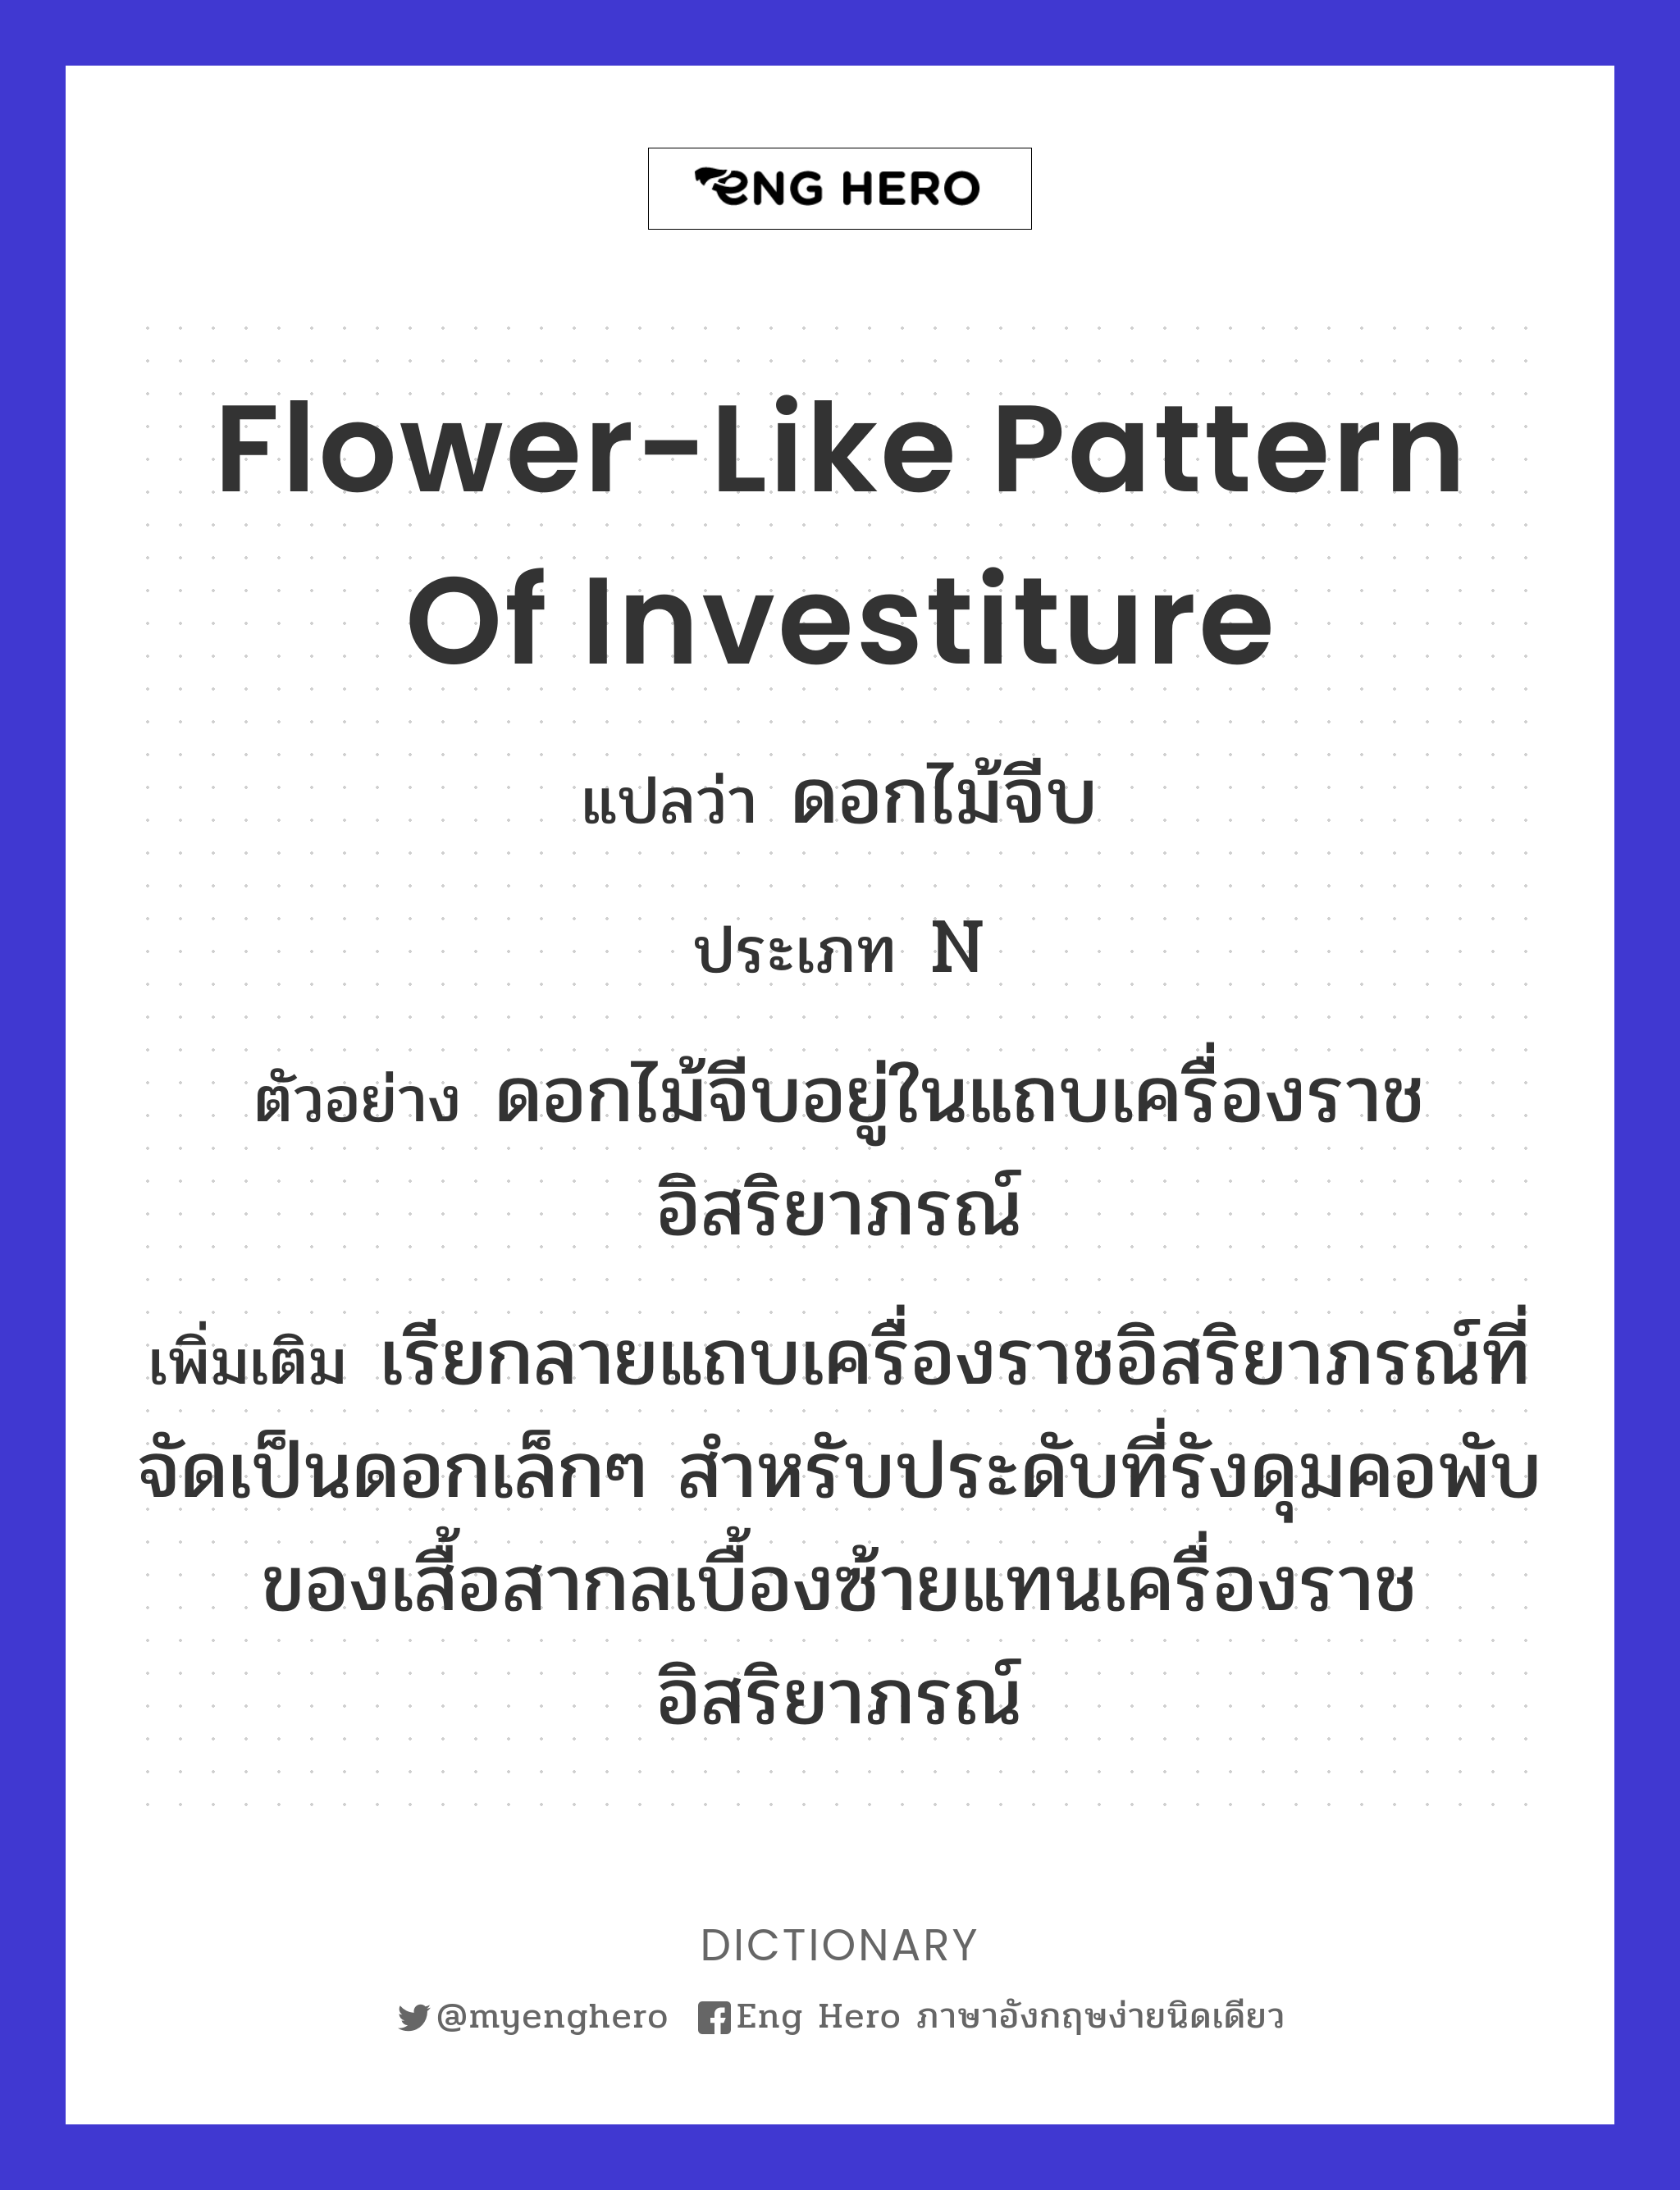 flower-like pattern of investiture